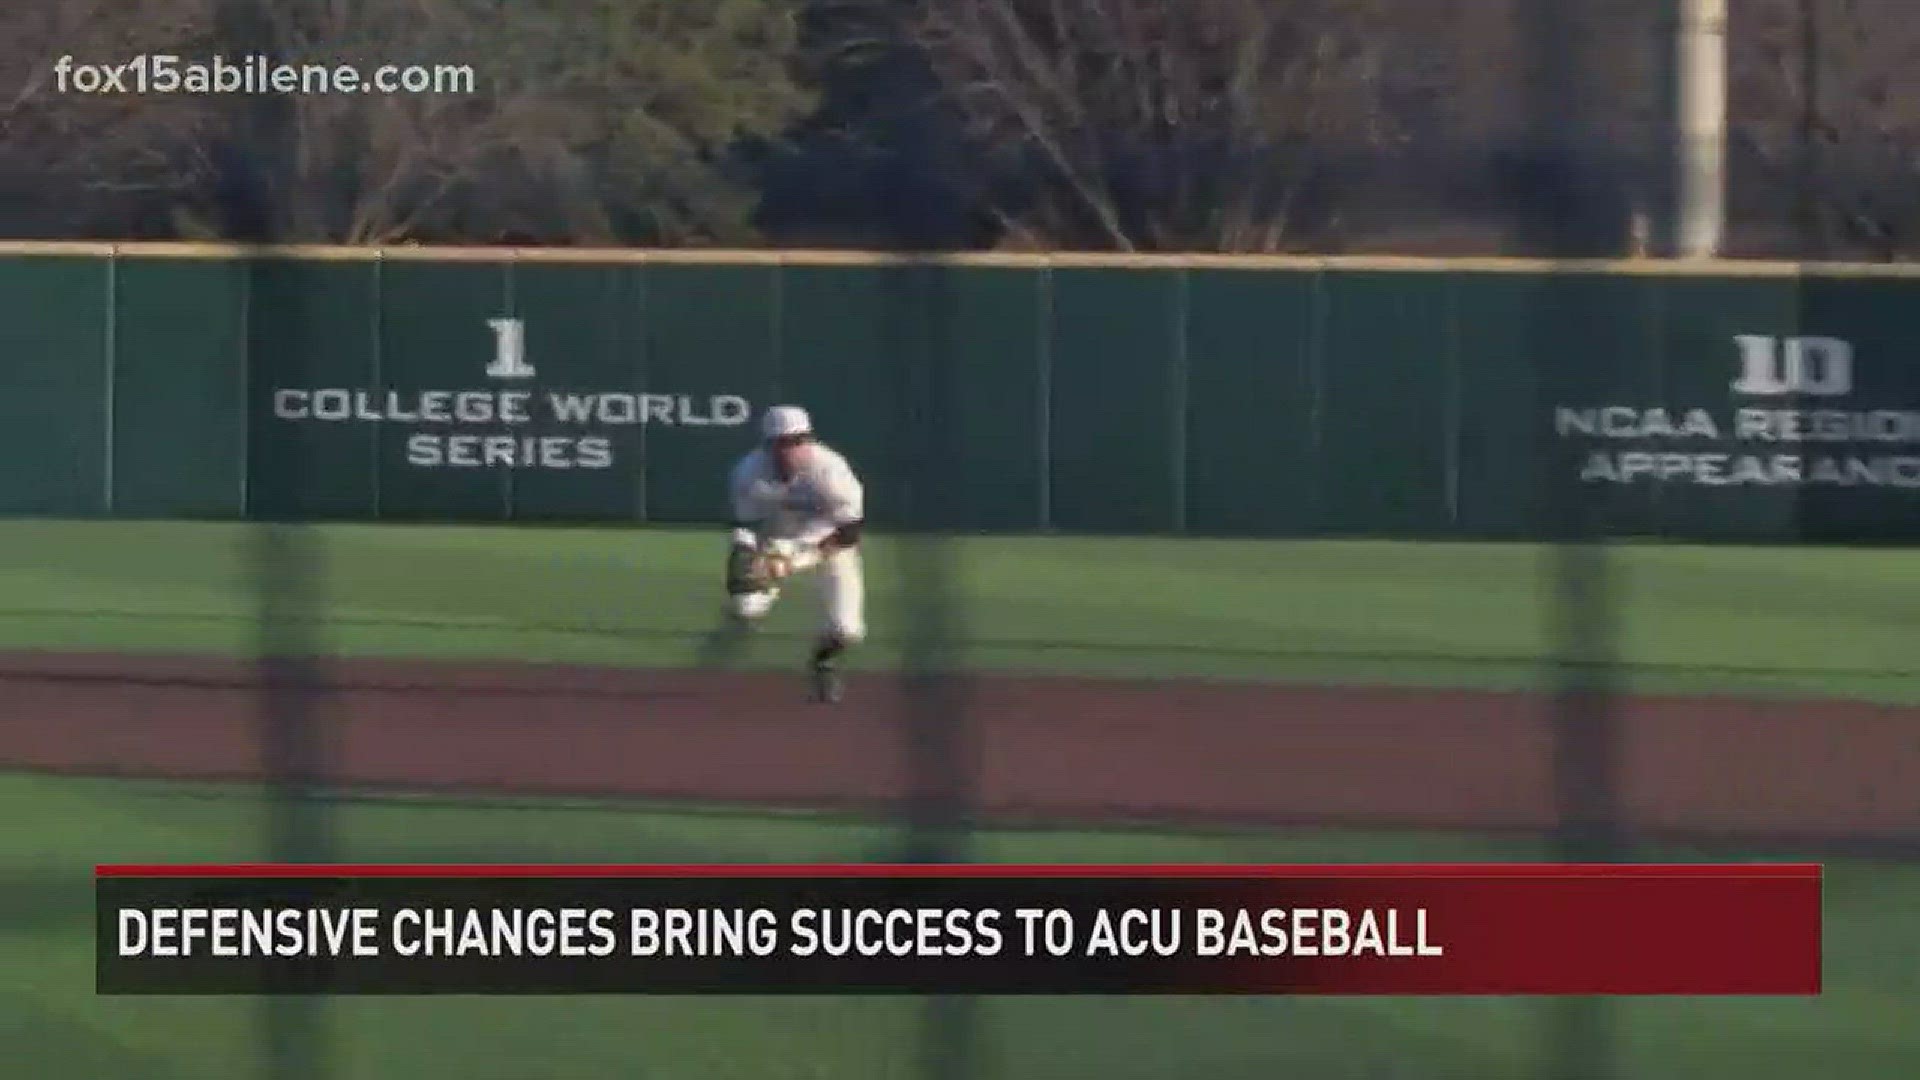 With under 20 games played thus far this season, the ACU Baseball team has already matched their win total from all of last season (13 wins). The turn around is said to have come from having more trust in the defense.